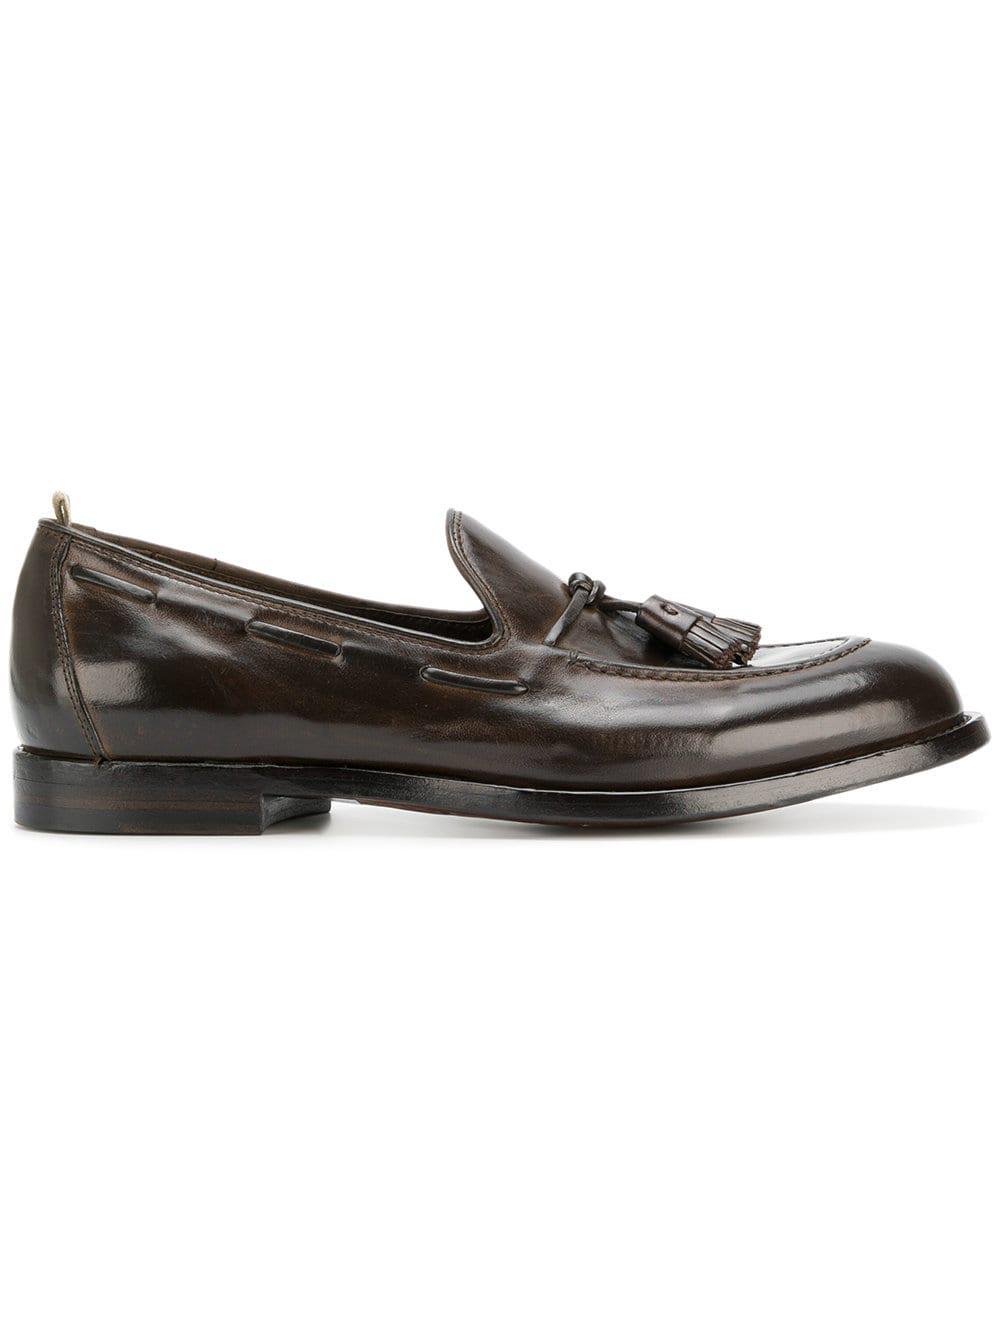 Officine Creative Leather Tassel Detail Loafers in Brown for Men - Lyst